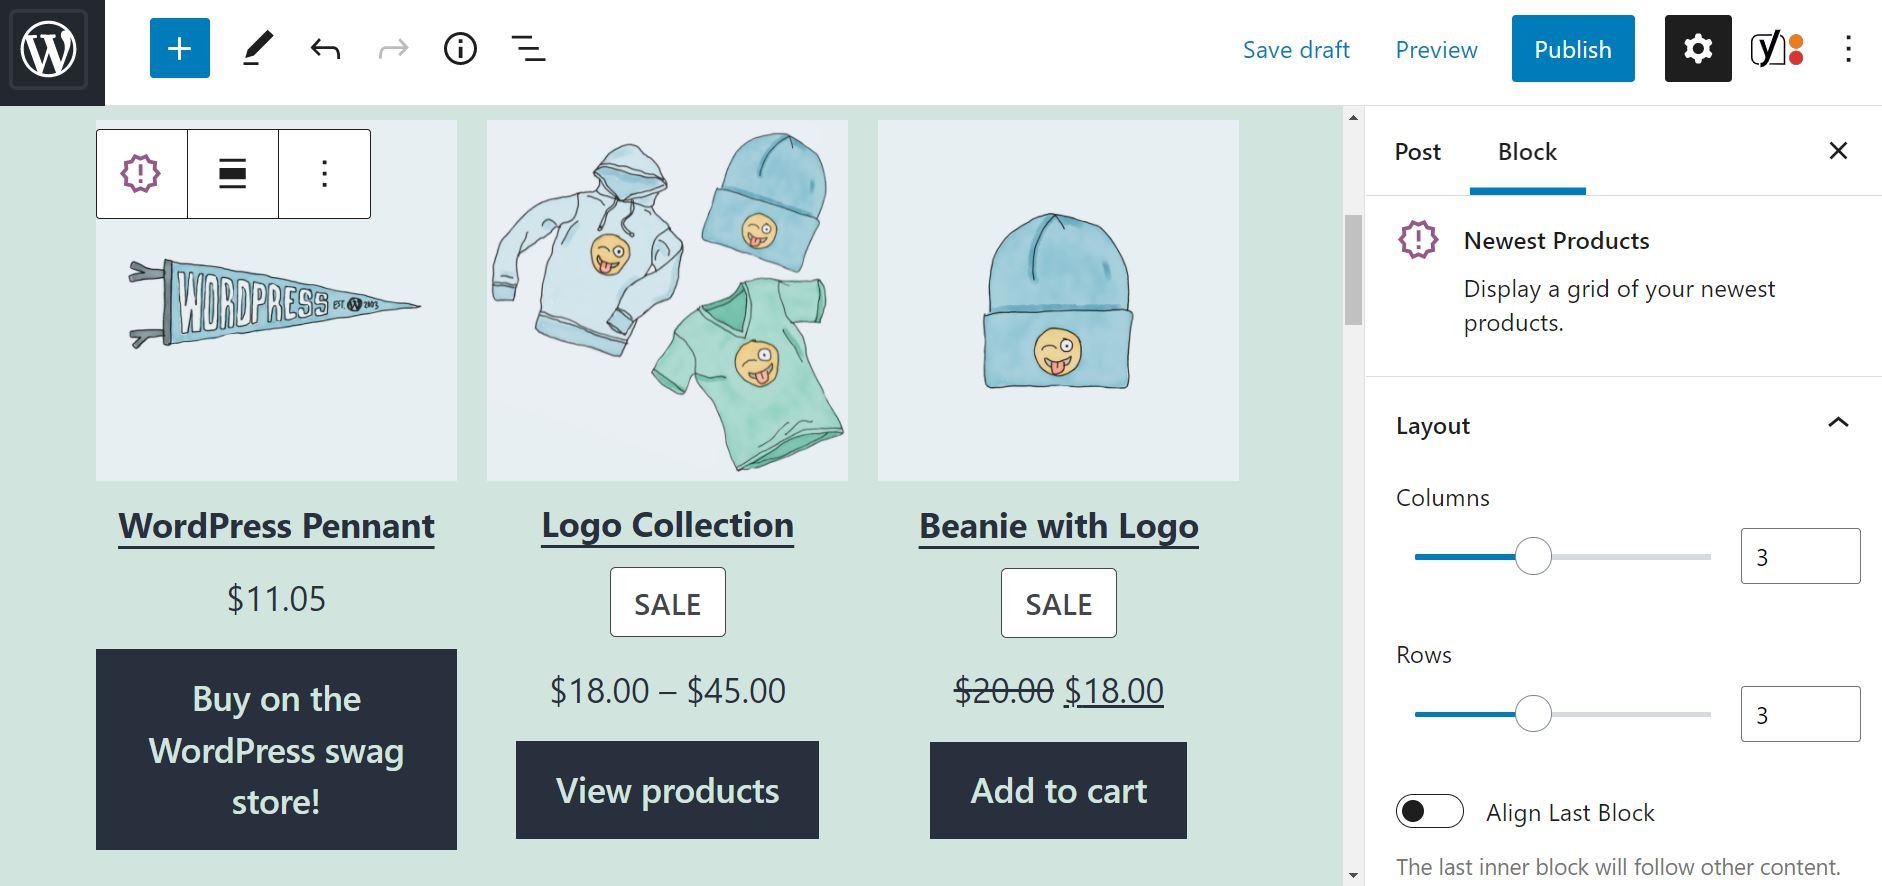 how-to-use-the-newest-products-woocommerce-block-2 如何使用最新产品 WooCommerce Block